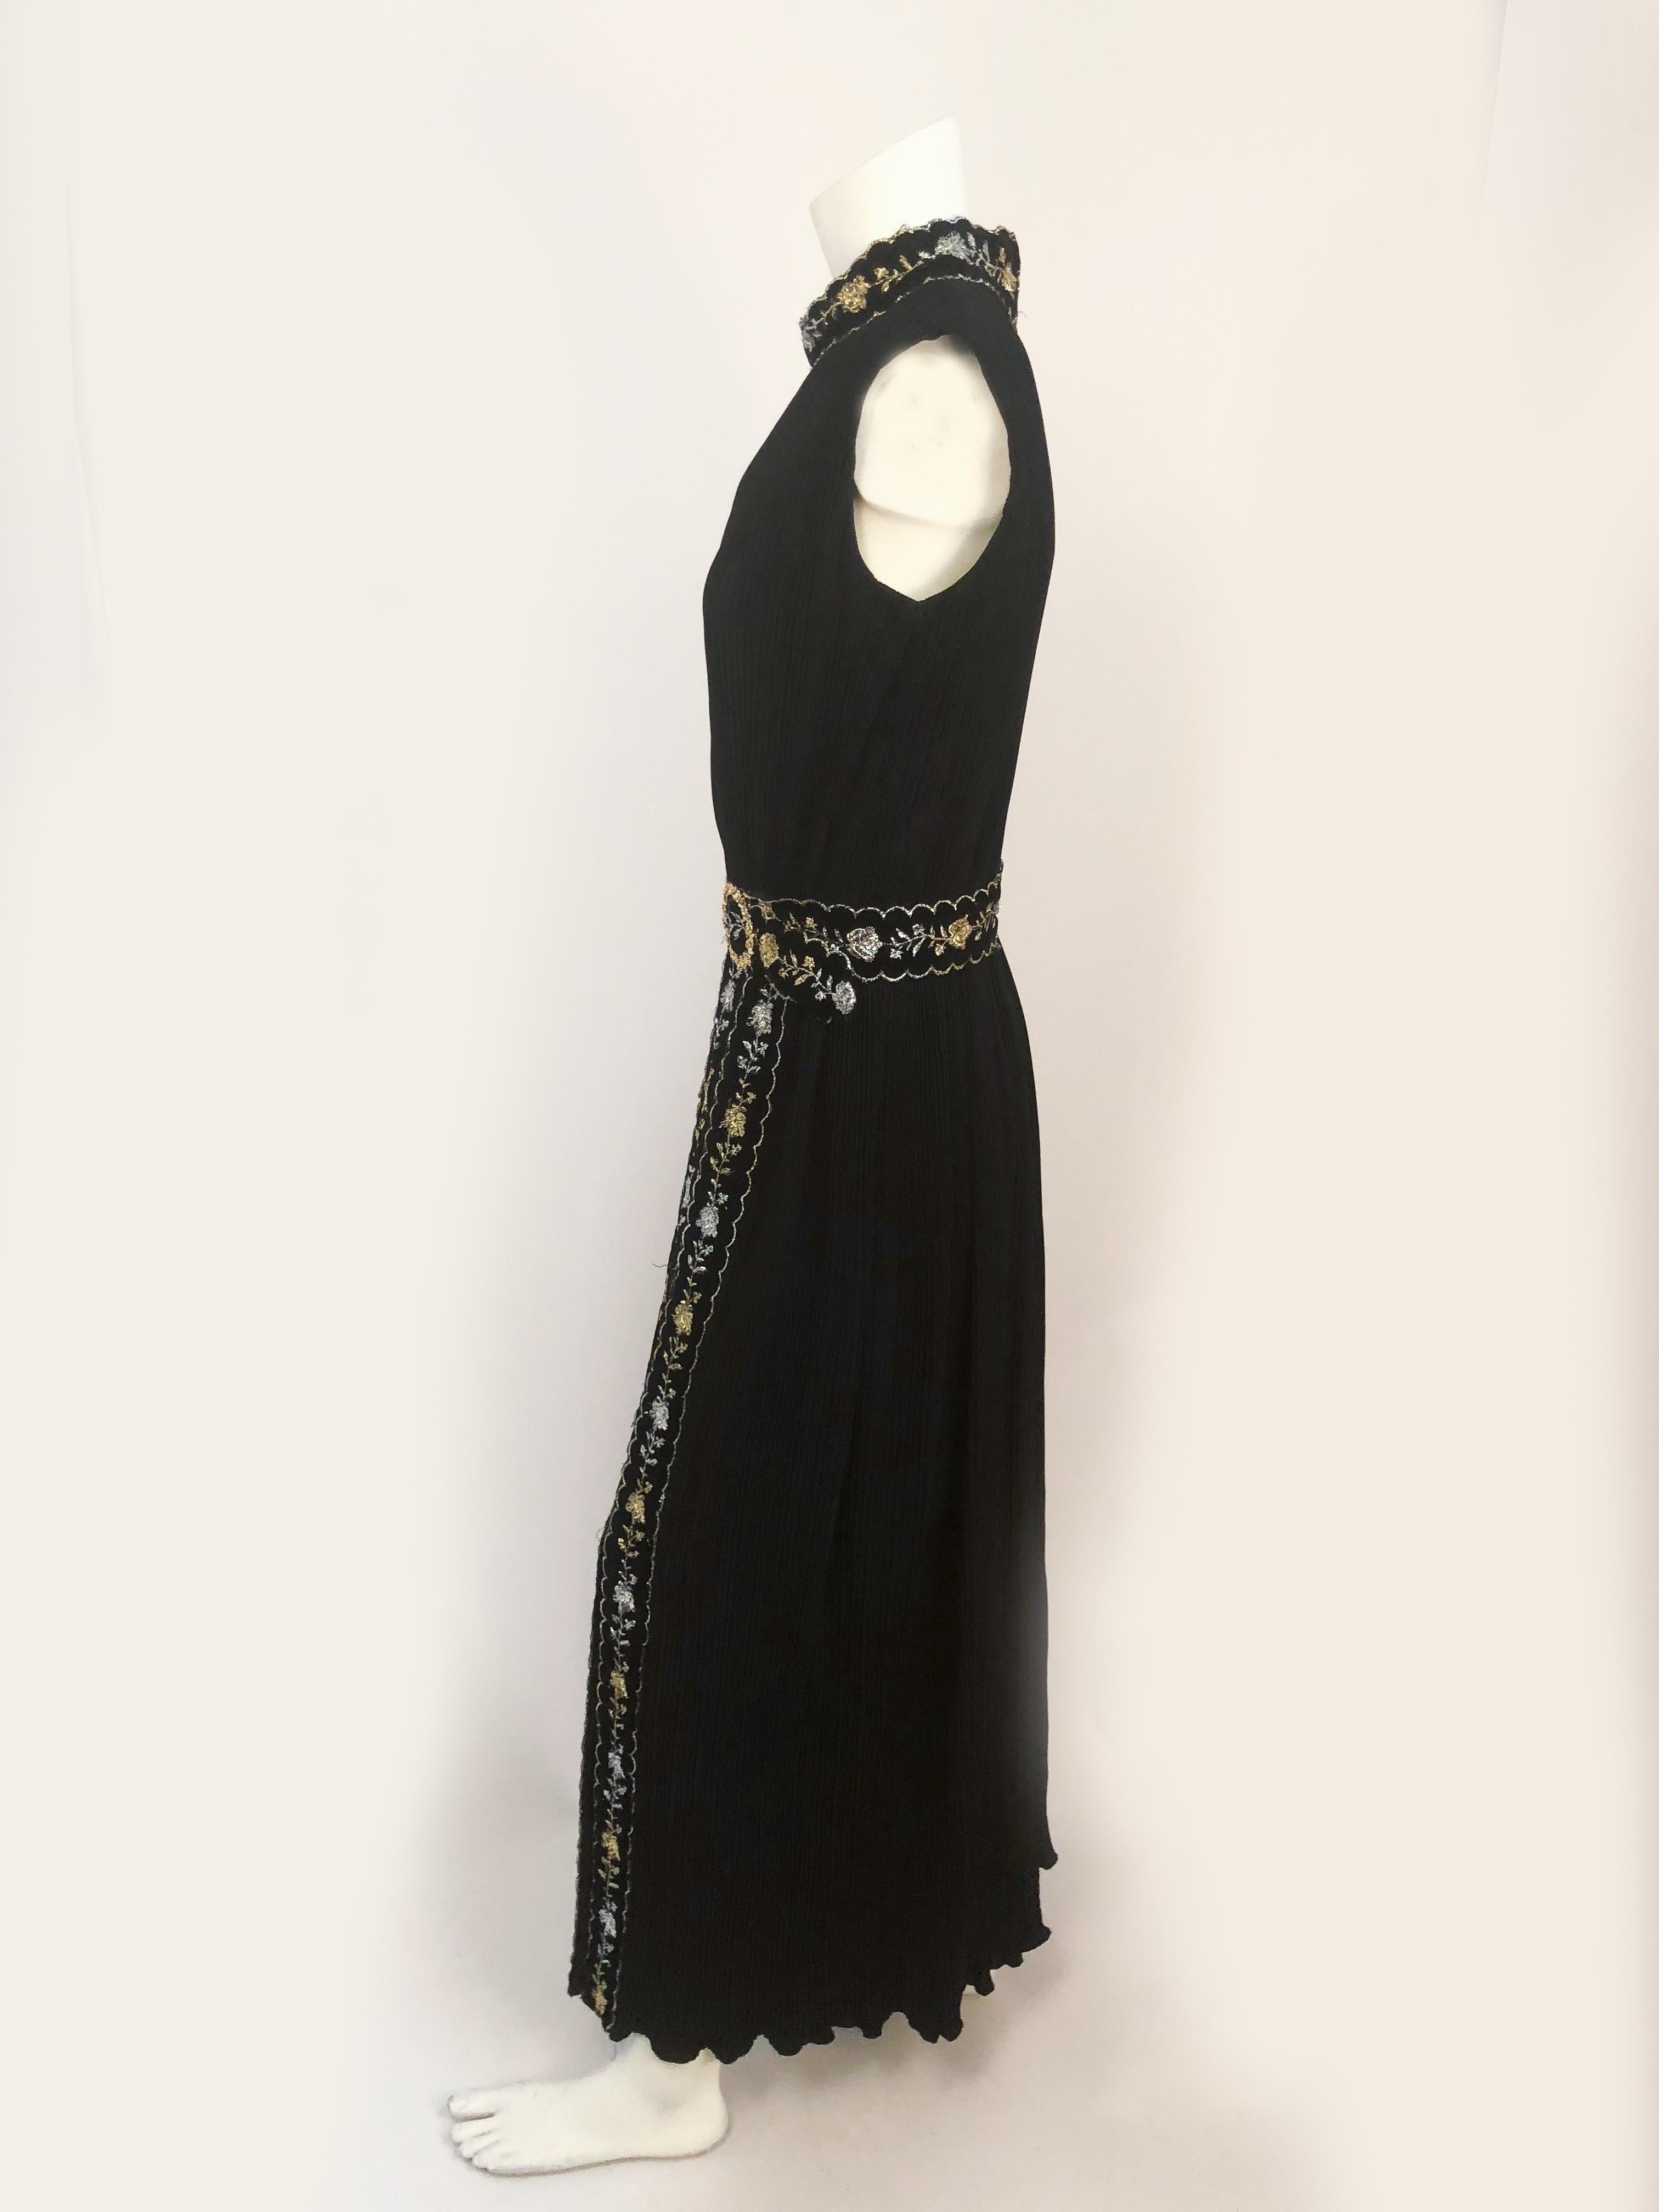 1960s Black Pleated Sleeveless Dress with Velvet and Metallic Details. Velvet trim with gold/silver metallic toned laurex details and a floral brass belt buckle.